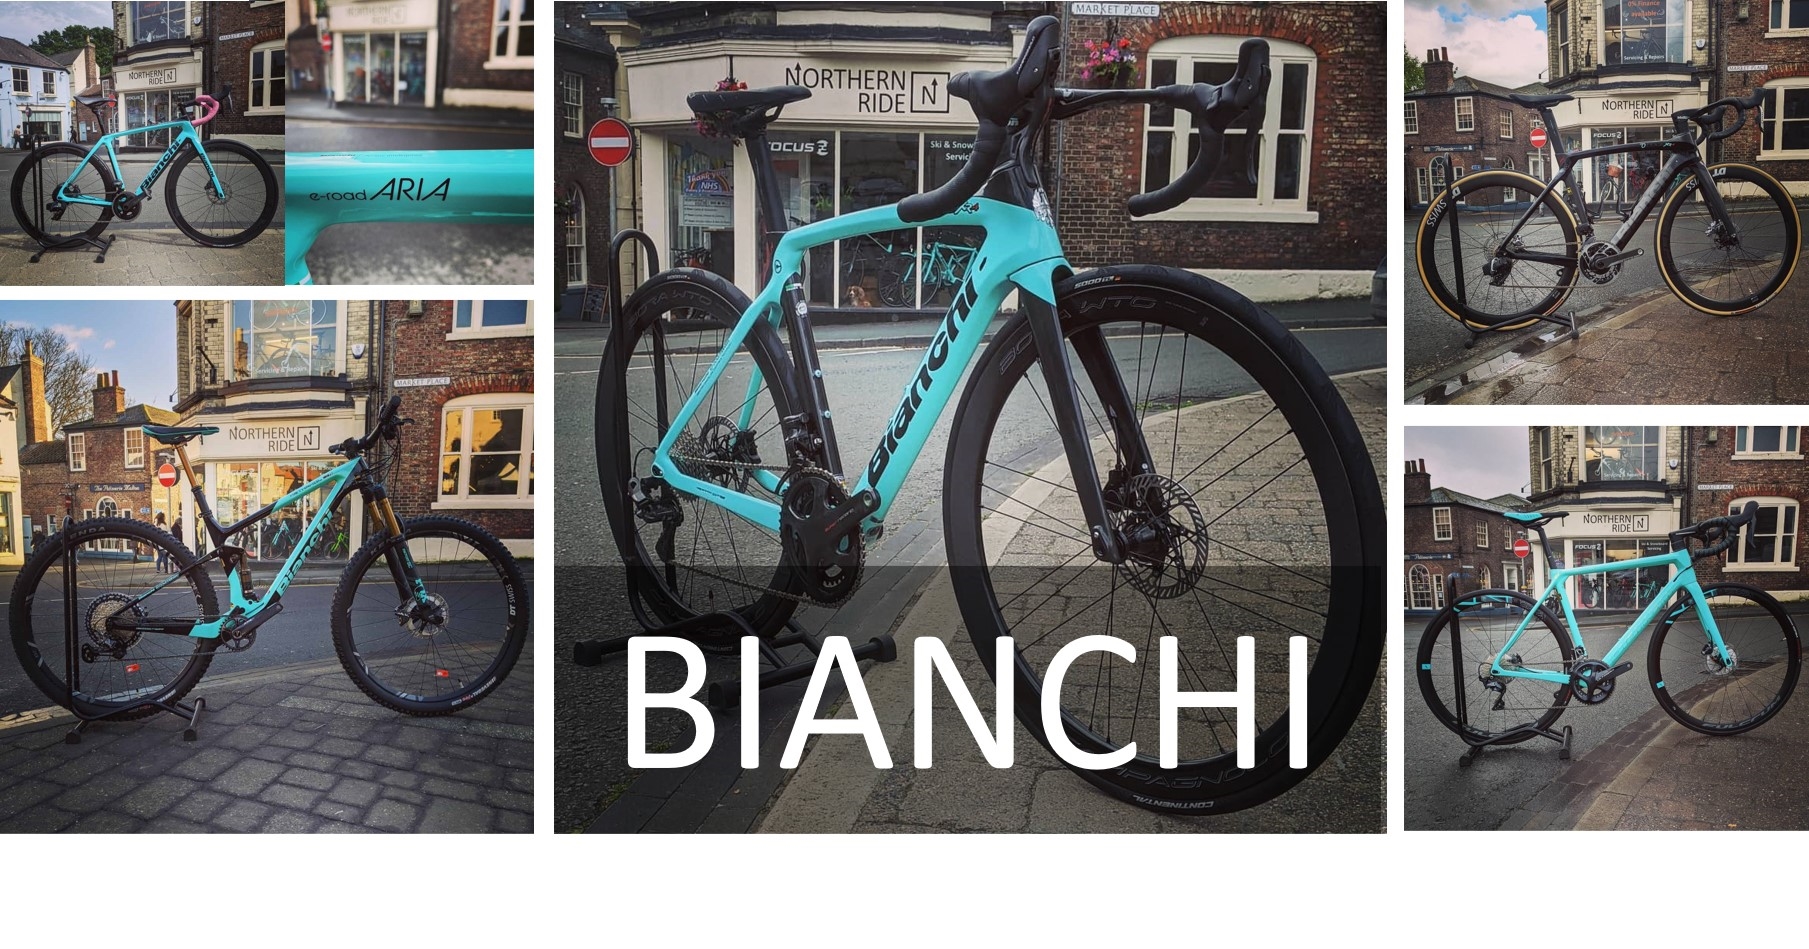 Bianchi Bikes | UK Stockist | Contact us for competitive pricing,  availability and information.